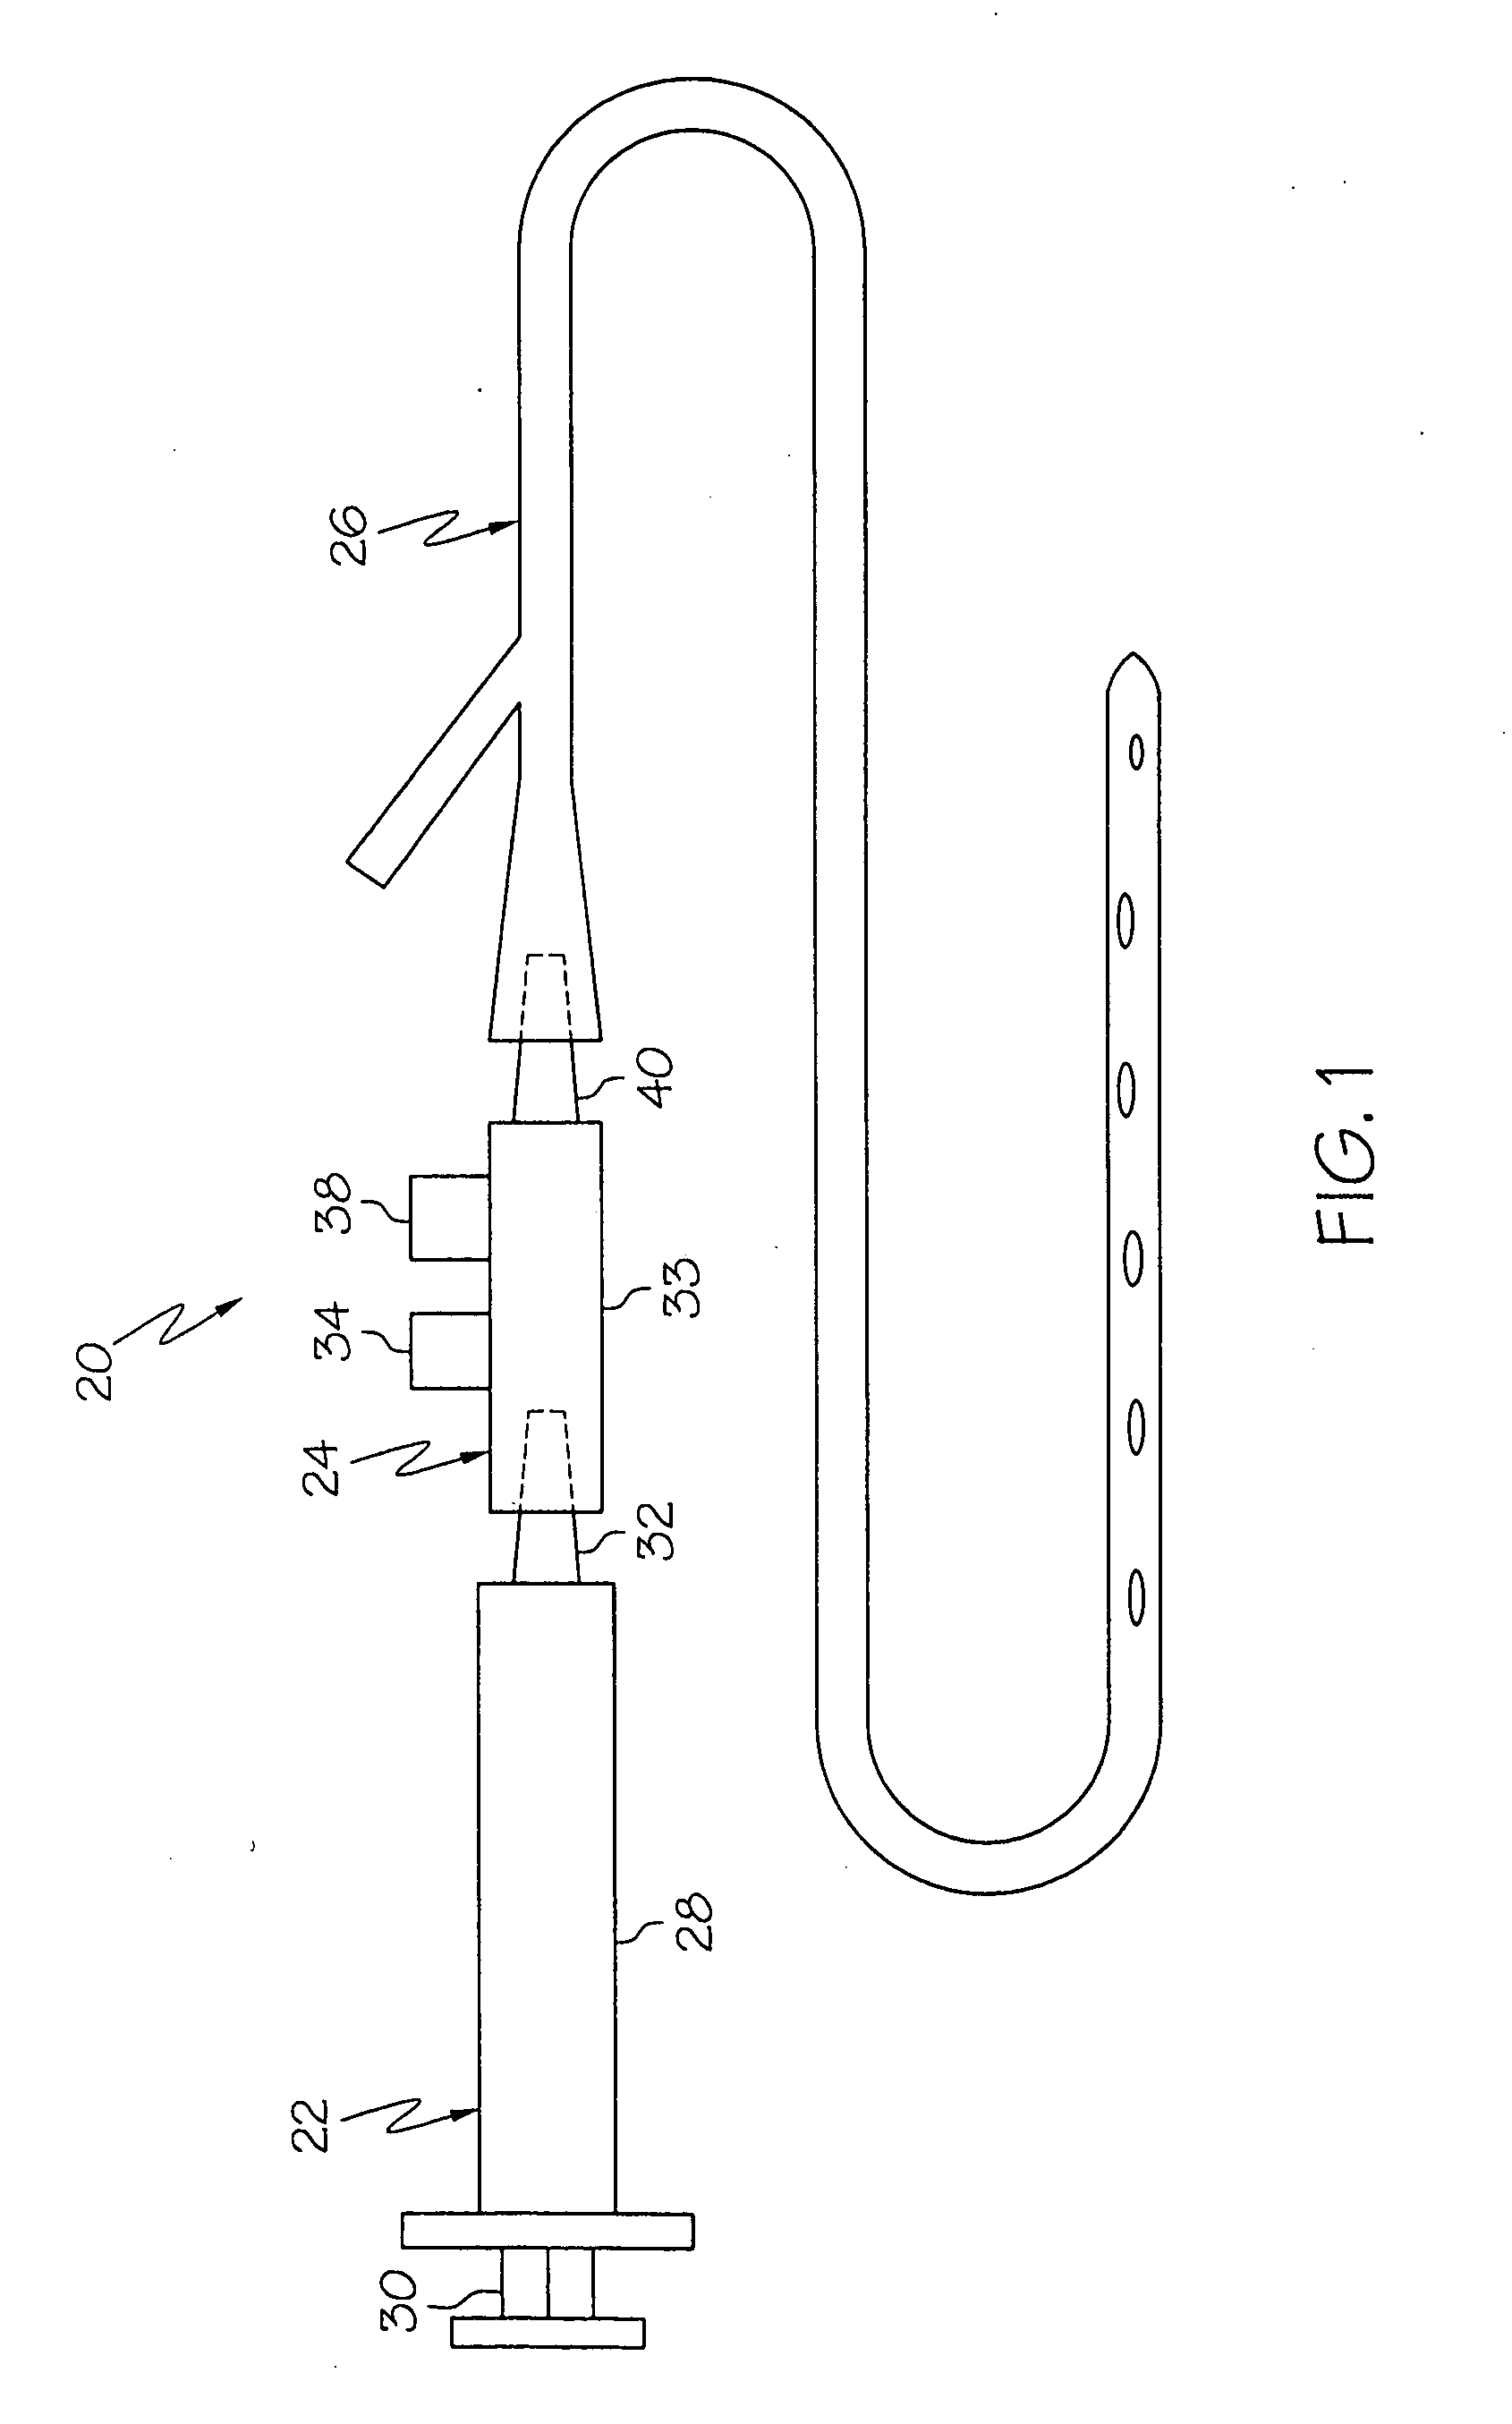 Gastrointestinal insufflation device and method